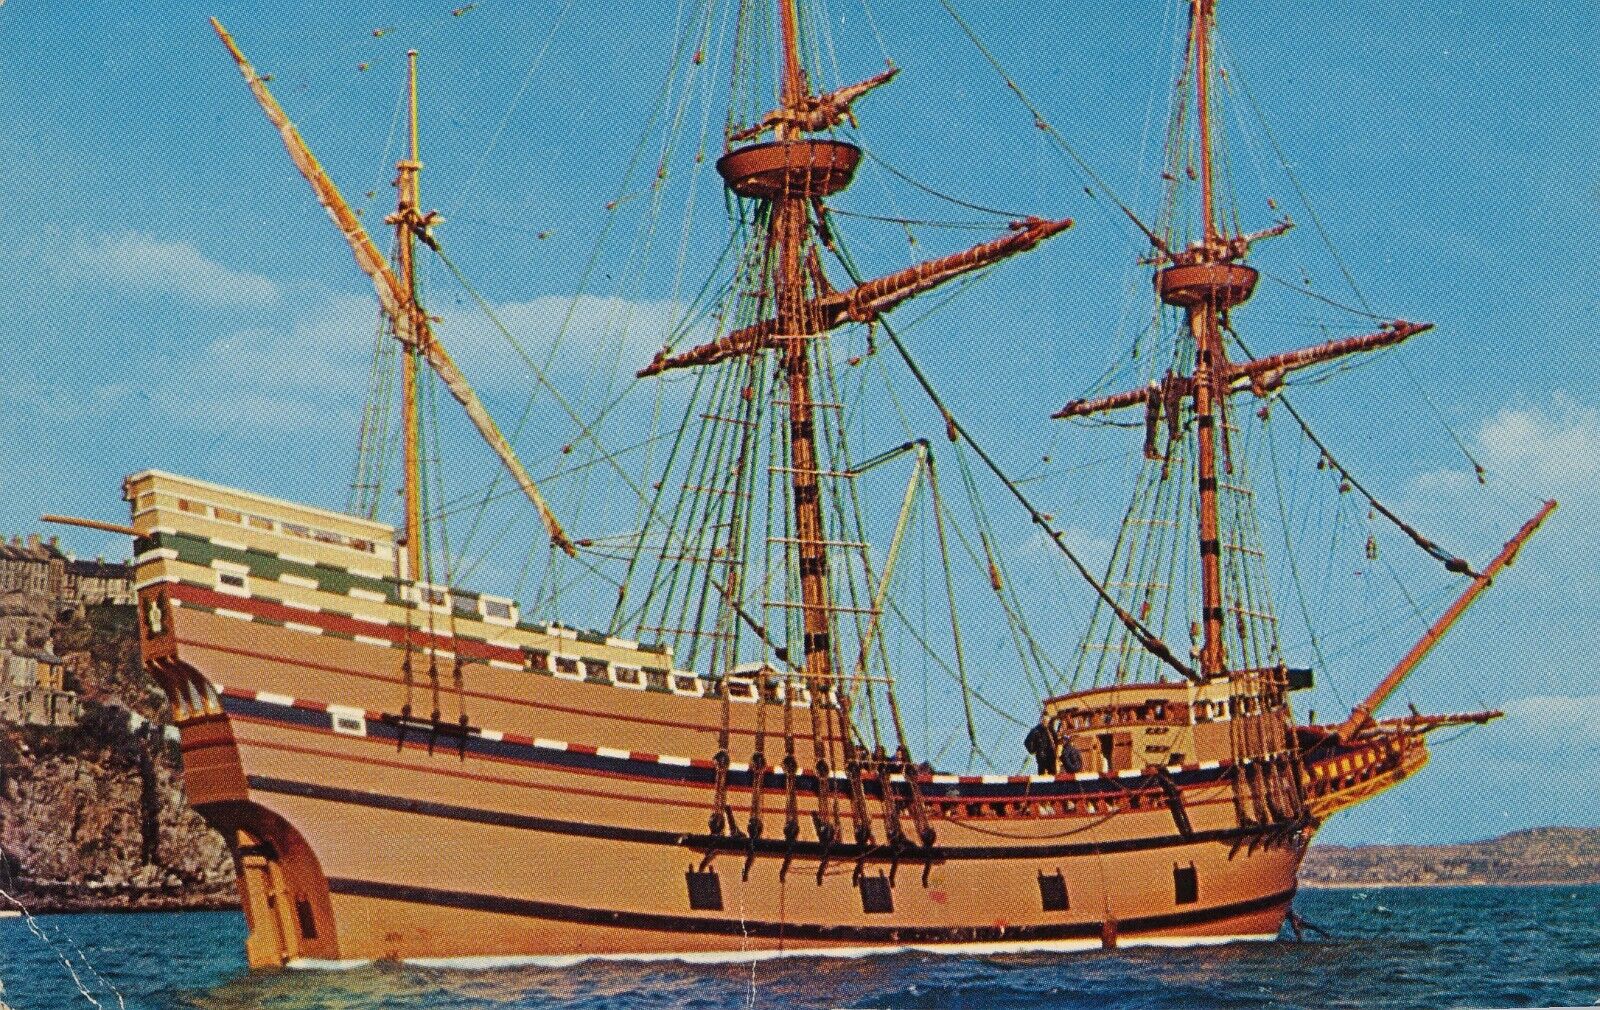 Mayflower II in Plymouth, MA vintage unposted Plimoth Plantation